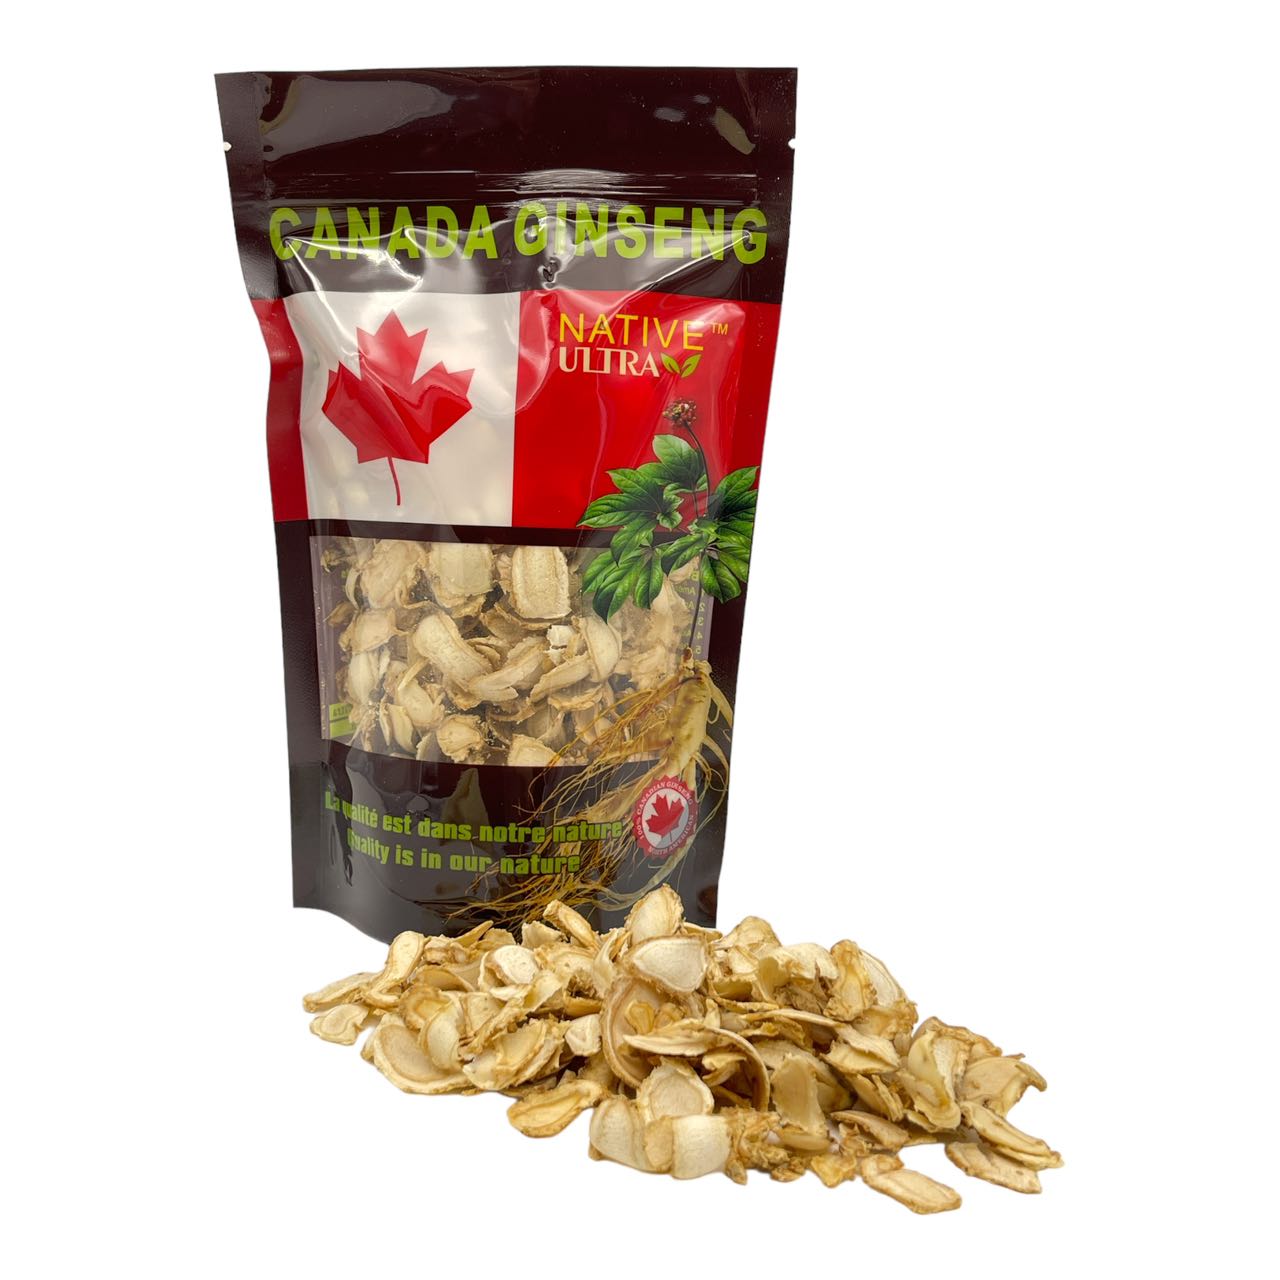 "NATIVE ULTRA" Premium American Ginseng Whole Root Slices, 227g/bag